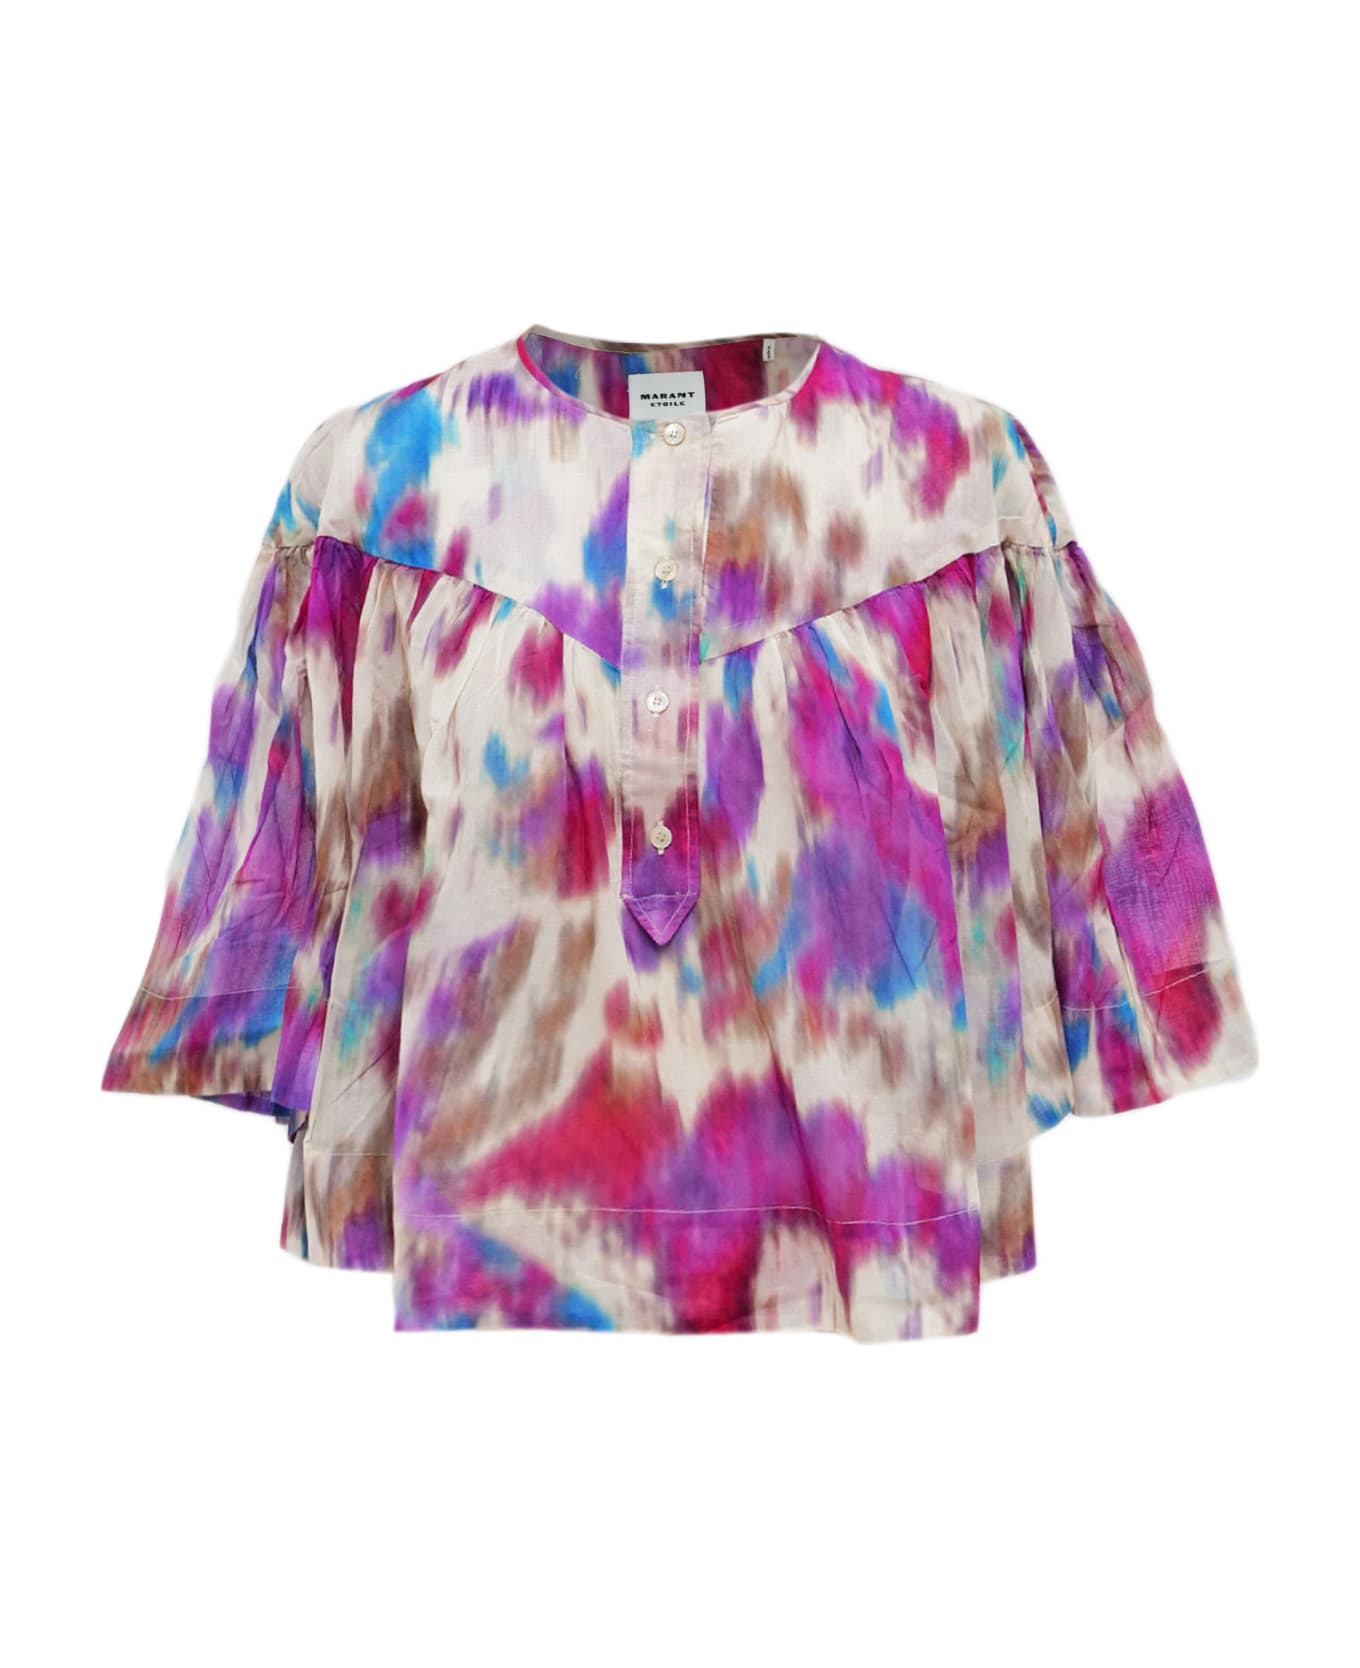 Marant Étoile Cotton Top With Long Sleeves - Multicolor